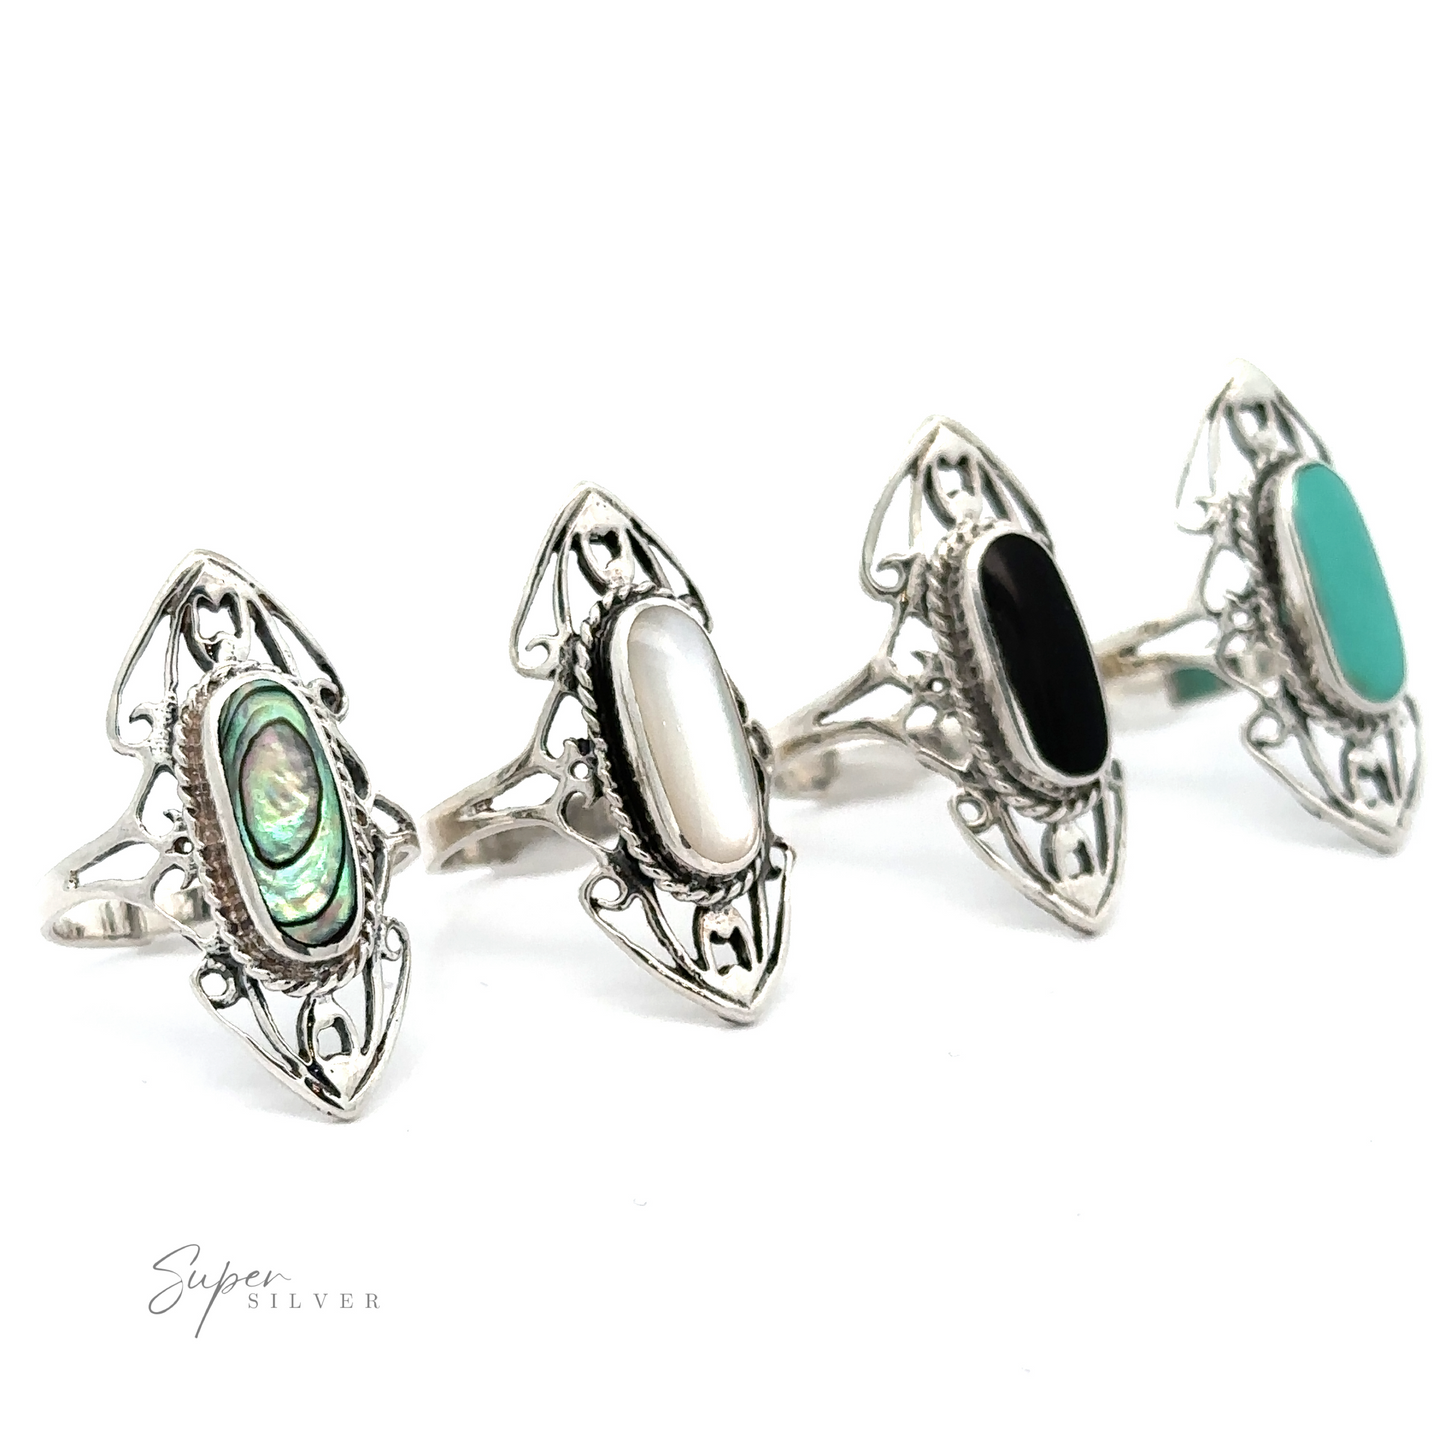 
                  
                    Three Elongated Filigree Rings With Oval Inlaid Stones showcased against a white background, including an open filigree design for a boho chic look.
                  
                